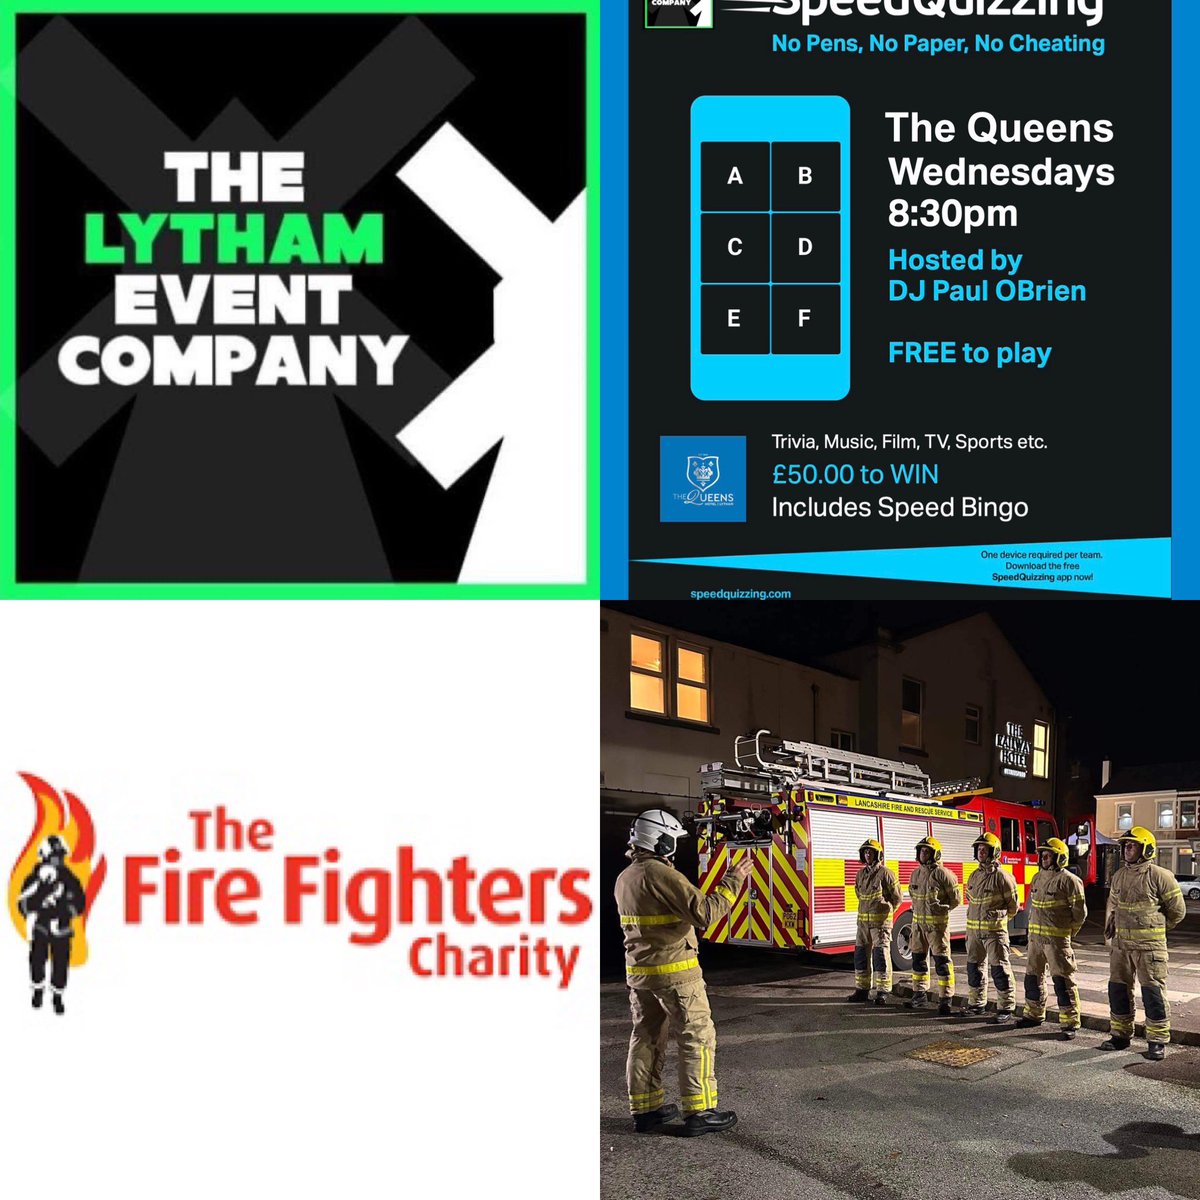 ⭐️ @SpeedQuizzing tonight in @queens_lytham with @djpaulobrien ⏰ 8:30pm 🍾 Drinks offers 💰 WIN £50.00 ✅ FREE to play 👩‍🚒 Donations taken for @firefighters999 @LythamFire @LancashireFRS 👏 During March we raised over £140. 🚒 THANKYOU